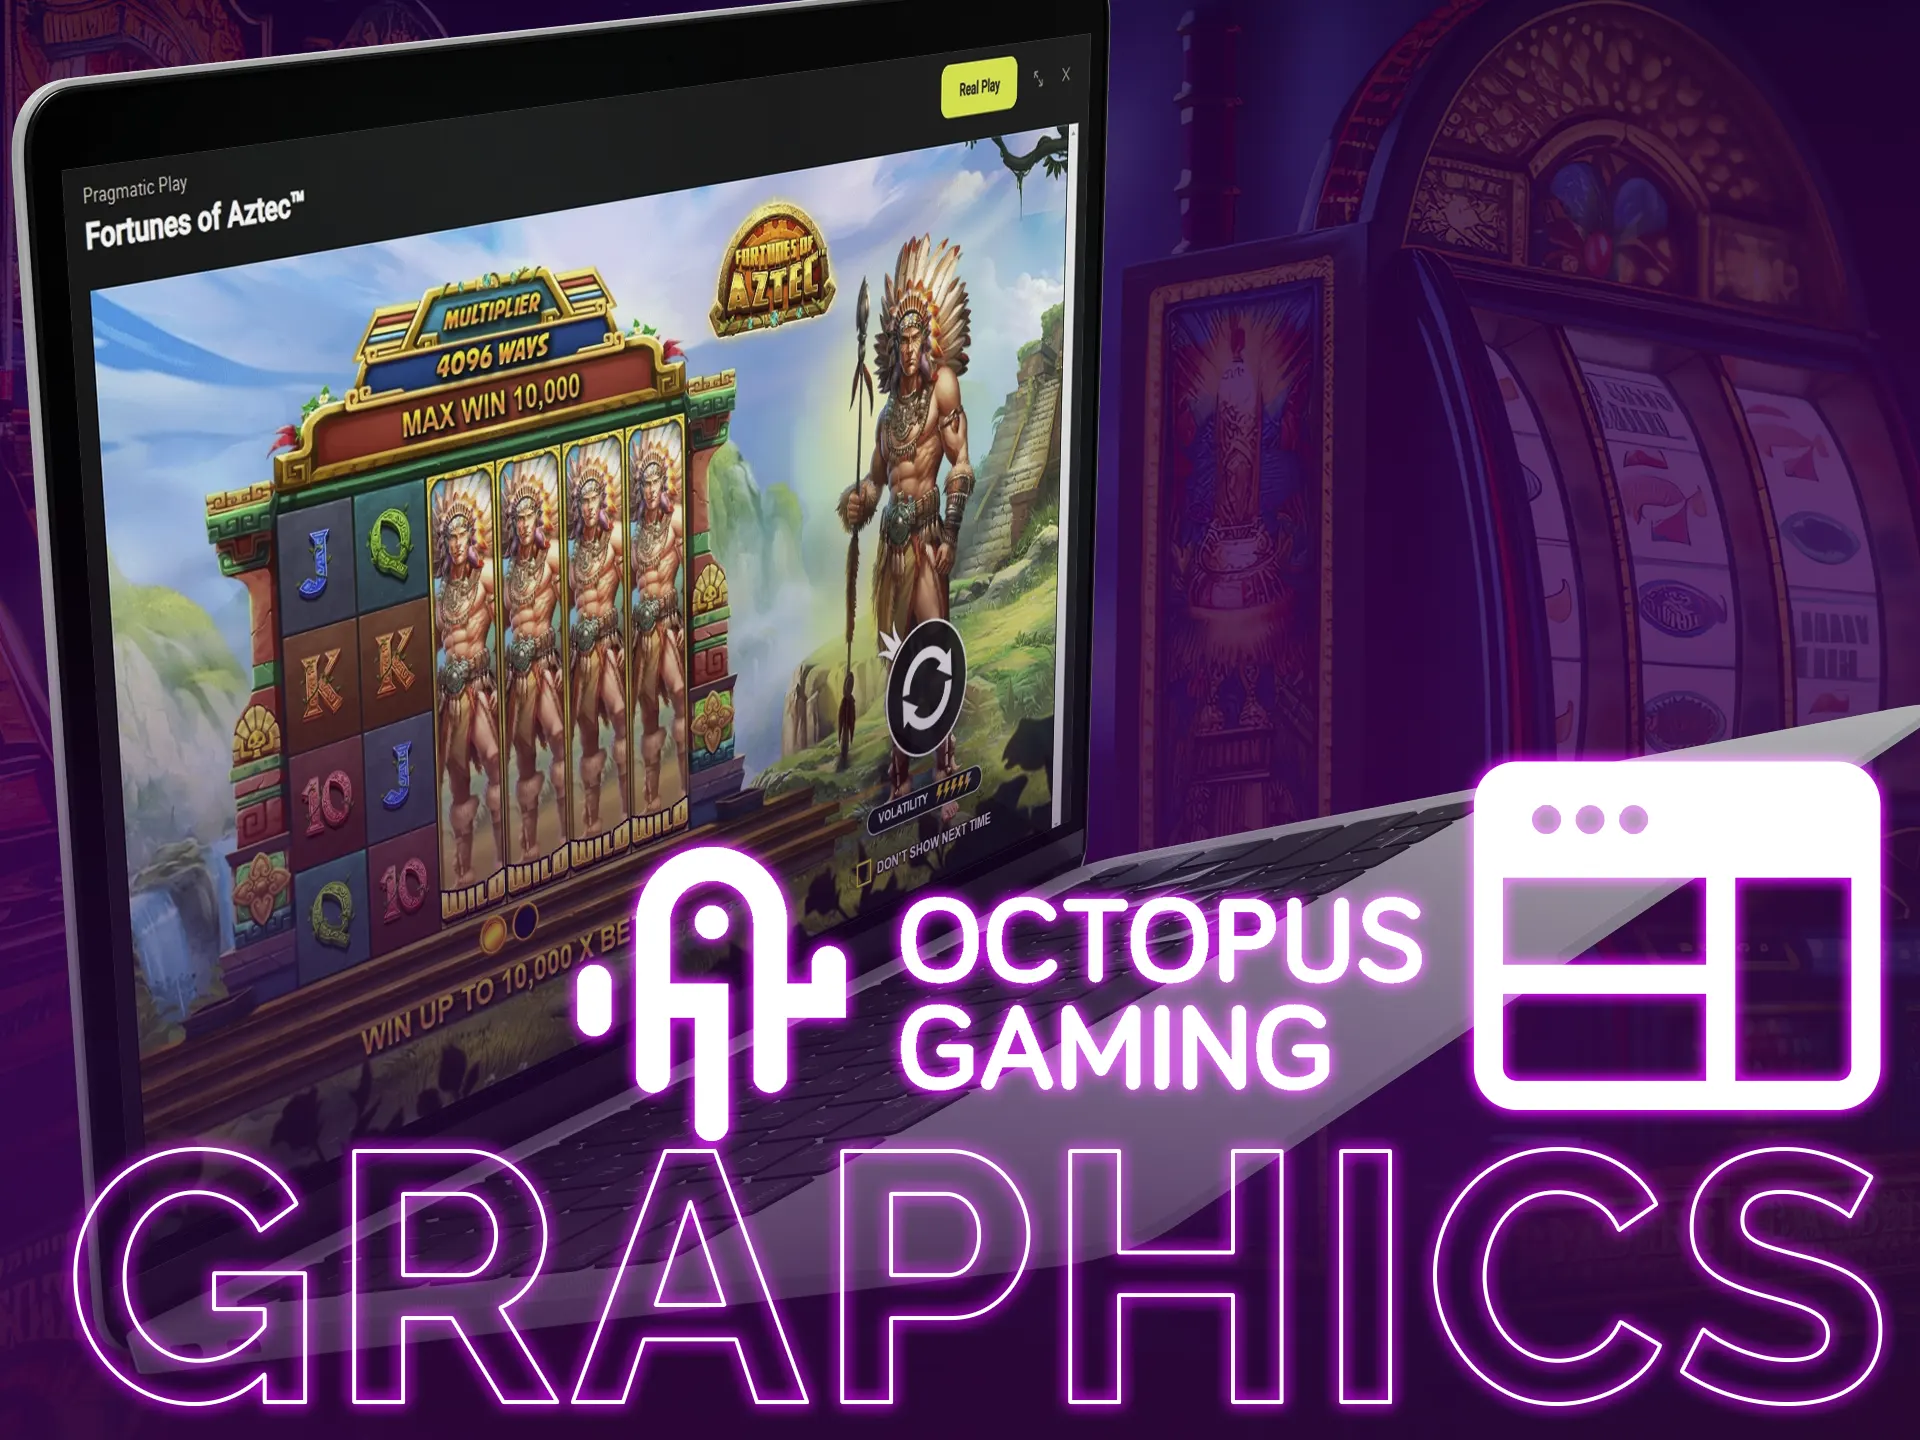 Meet the Octopus Gaming slots with top-quality graphics.